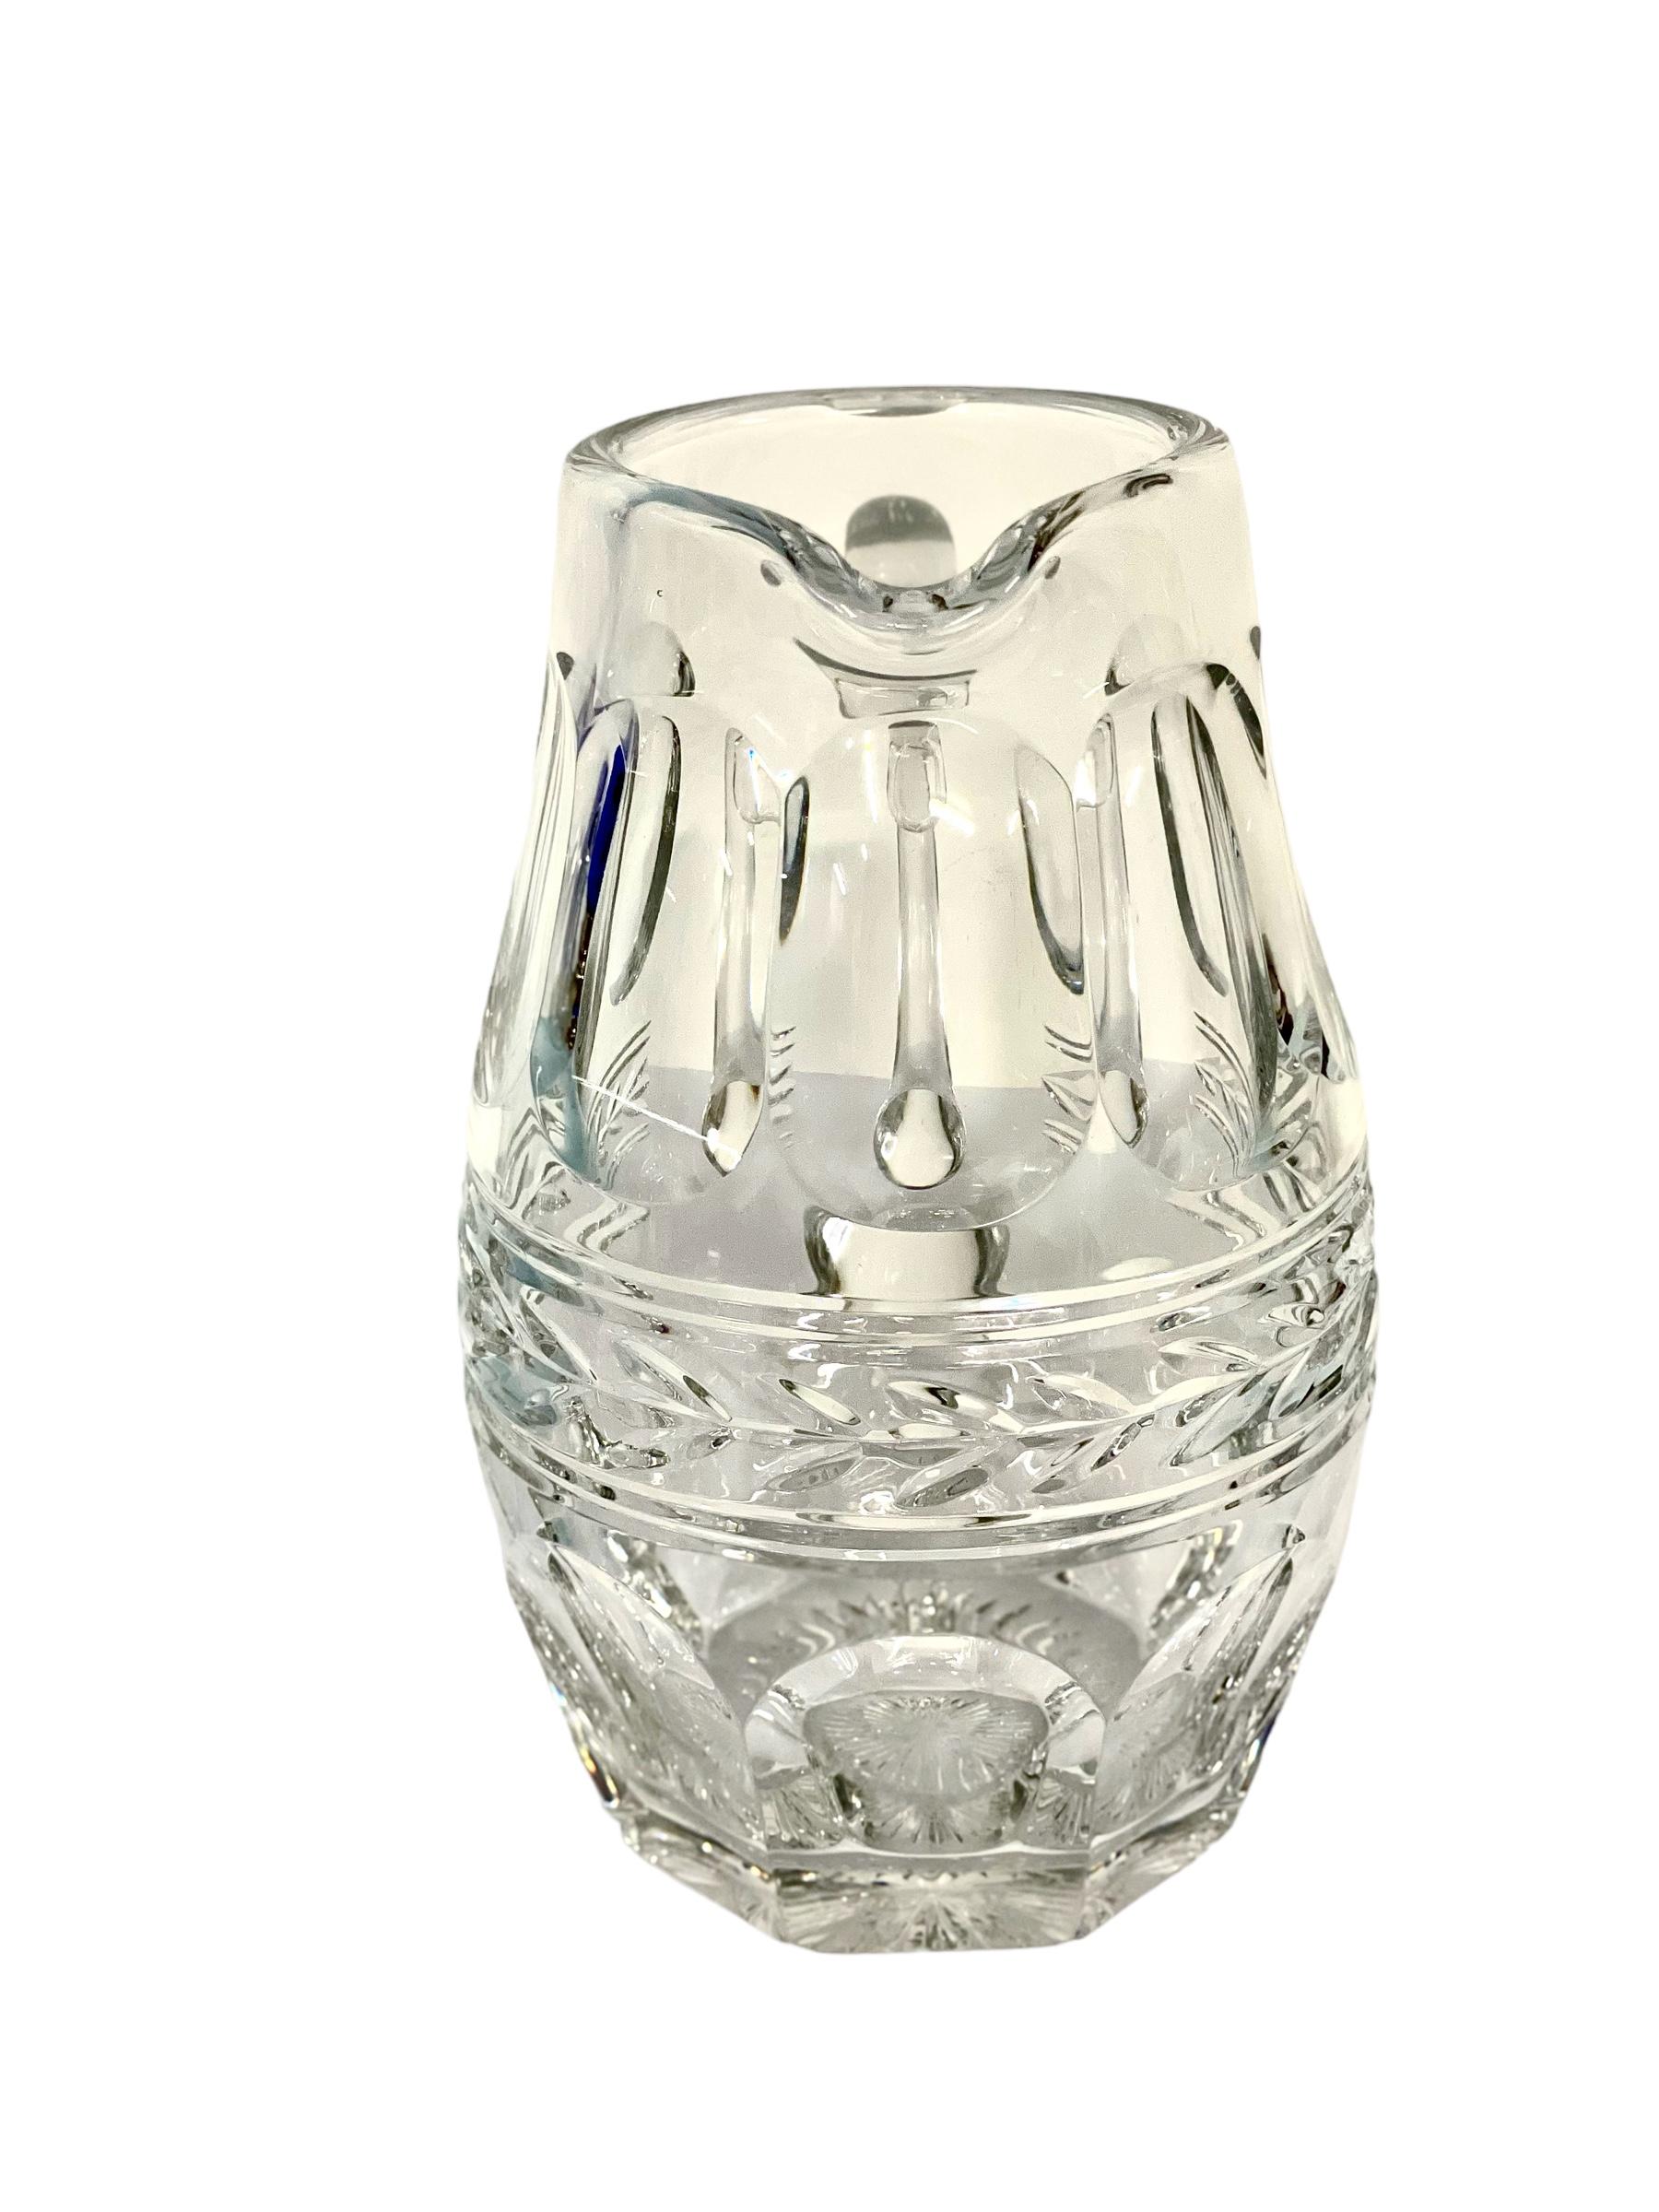 A superb heavy crystal water pitcher from the renowned house of Baccarat. This highly decorative handcrafted water jug, with its elegant and ergonomic handle, is perfectly proportioned and highly functional, with a spout that pours beautifully. The